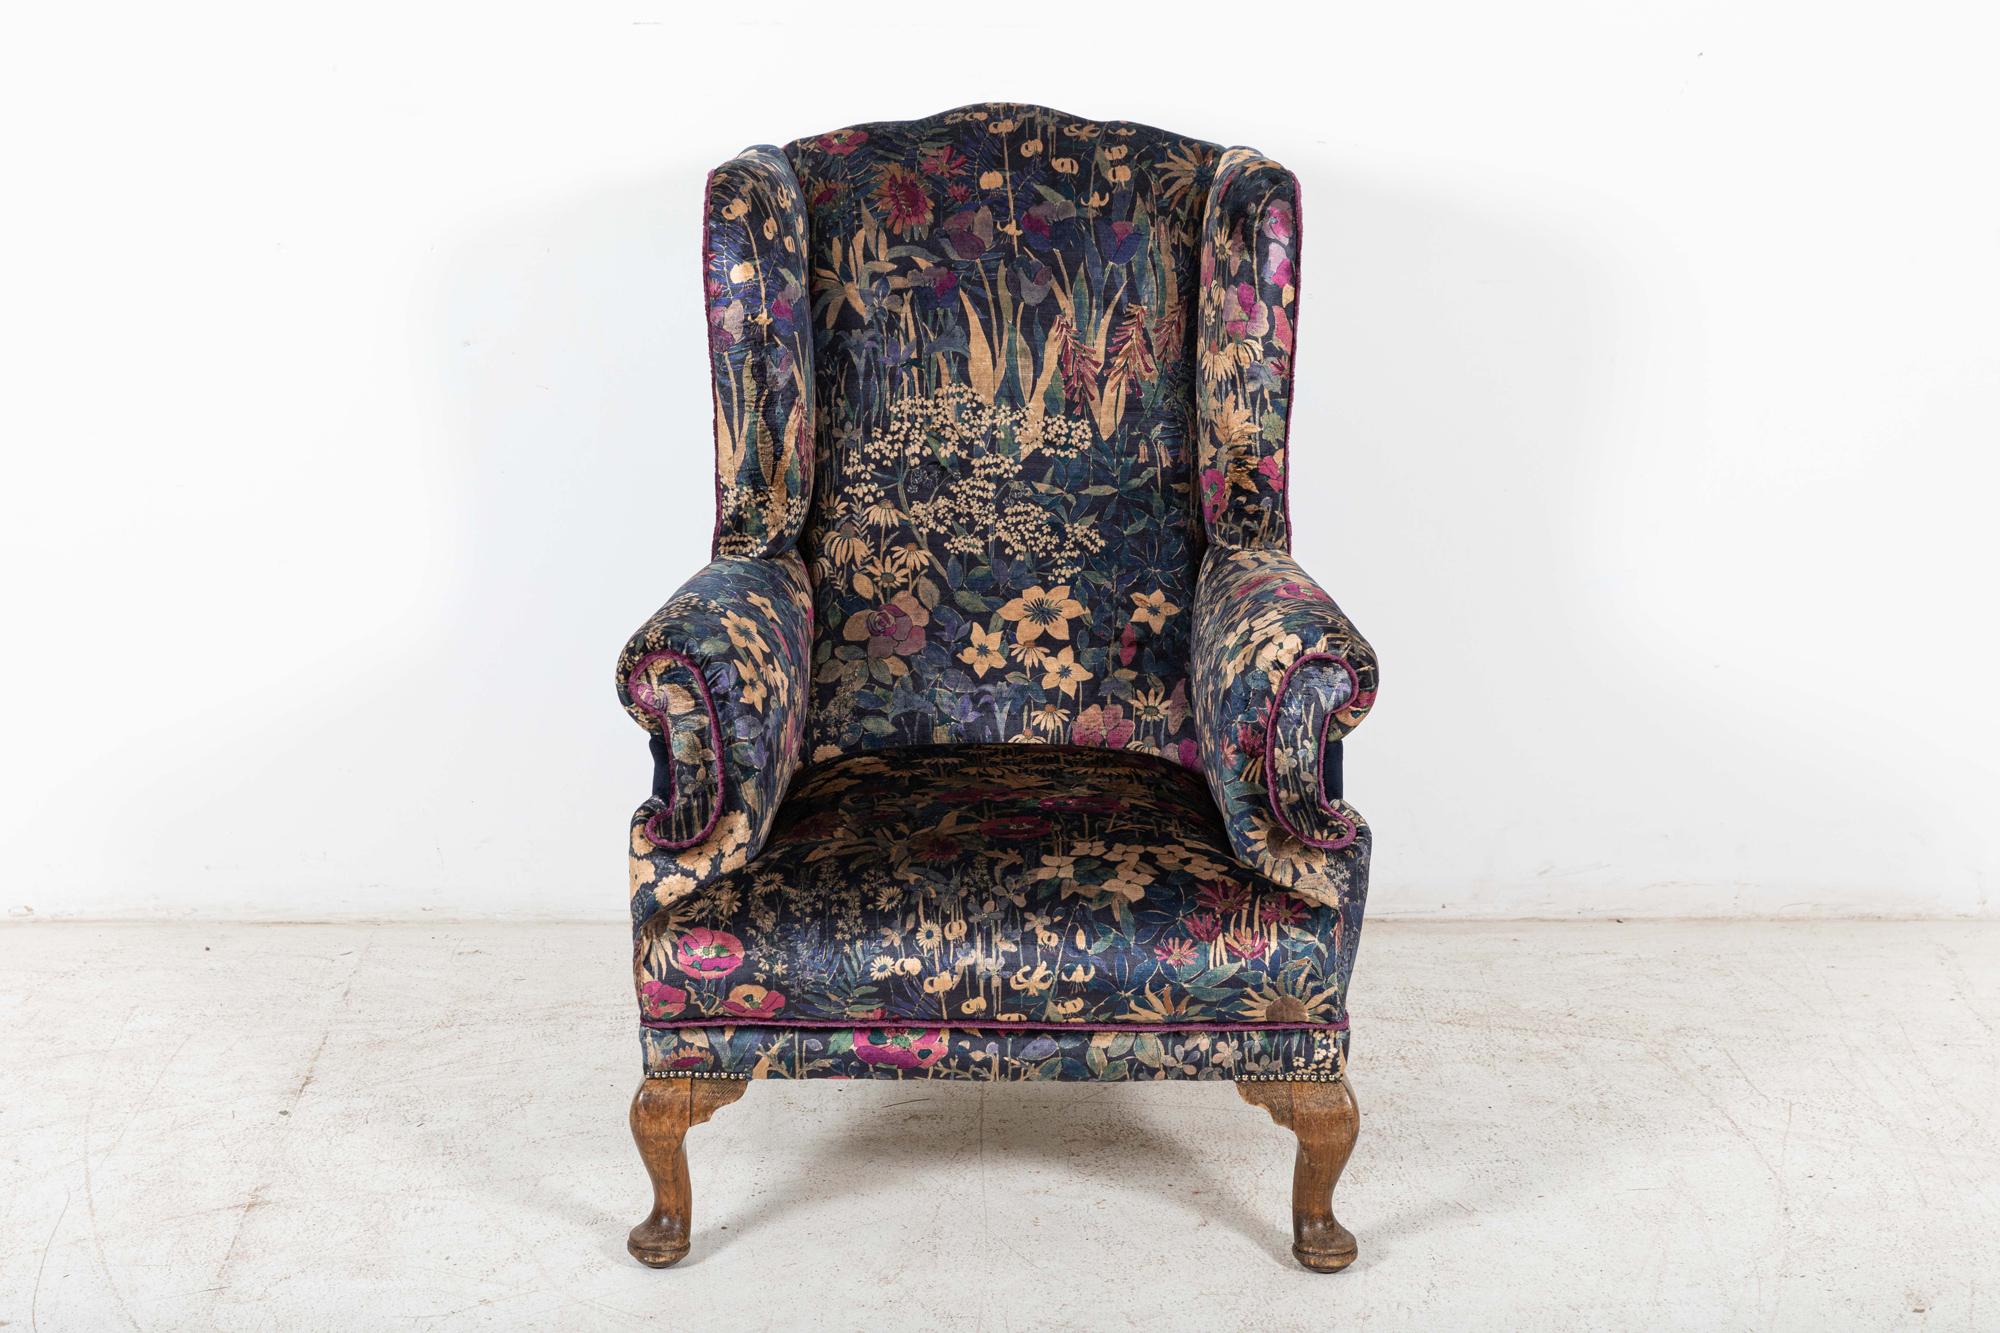 Circa 1870

19thC English Mahogany Wingback Armchair Re-upholstered in Liberty Farina Flowers

sku 540

W56 x D70 x H110 cm
Seat Height 40 cm